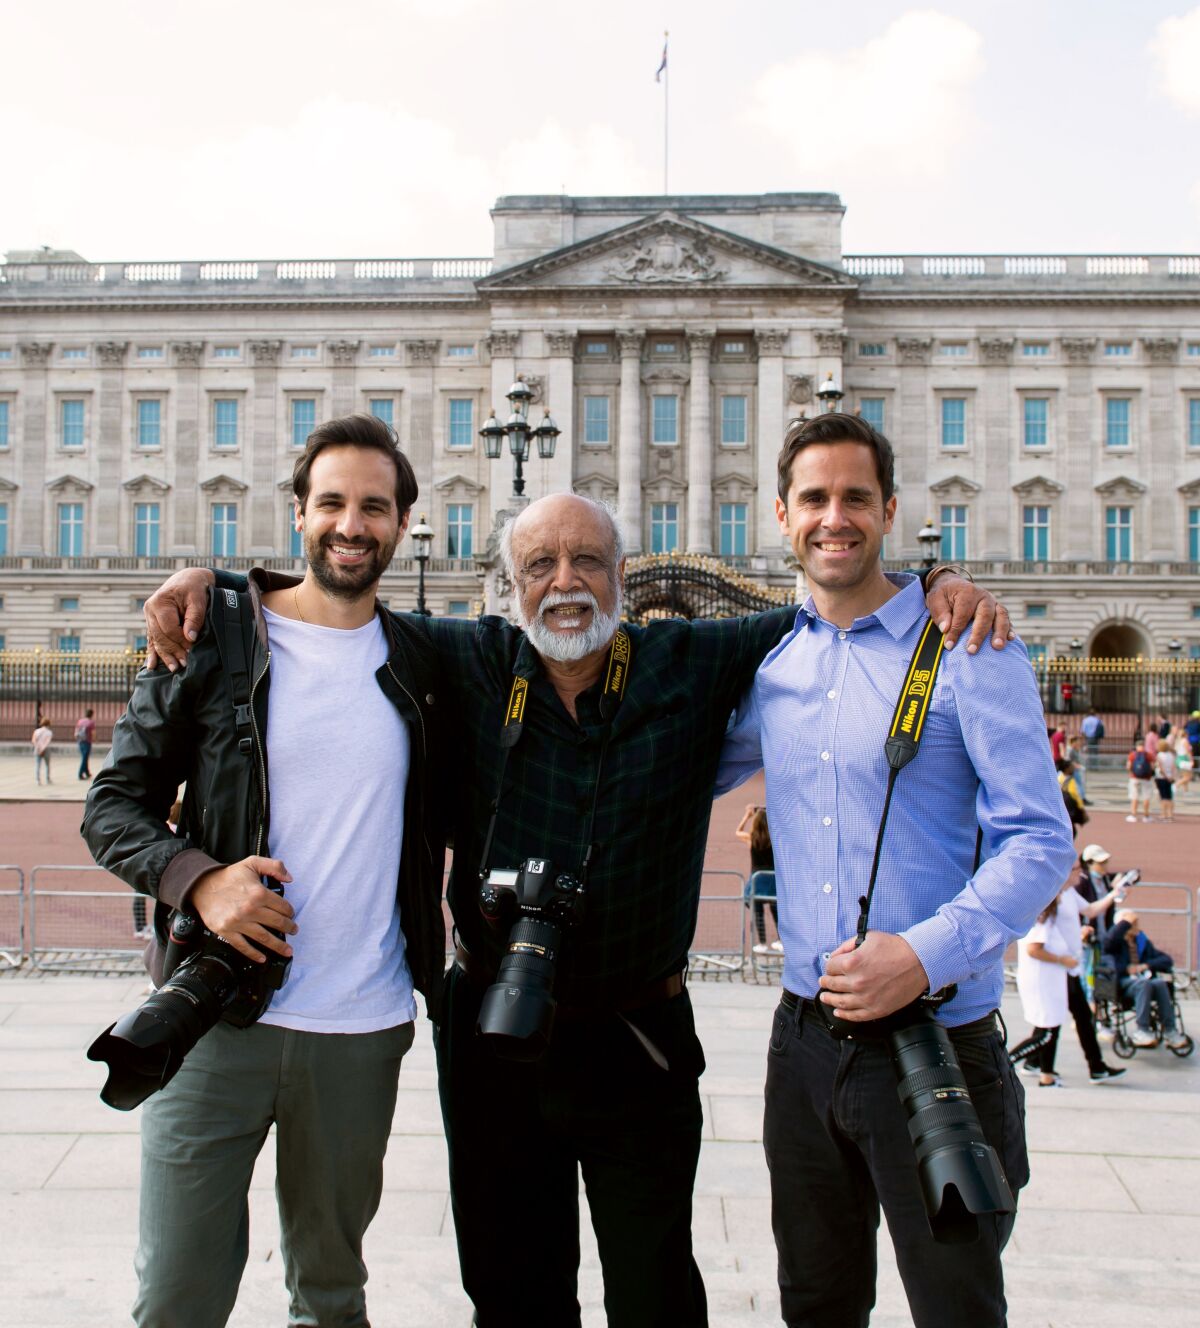 Royal photographer Anwar Hussein, center, with photographer sons Samir Hussein, left, and Zak Hussein, in London in 2020